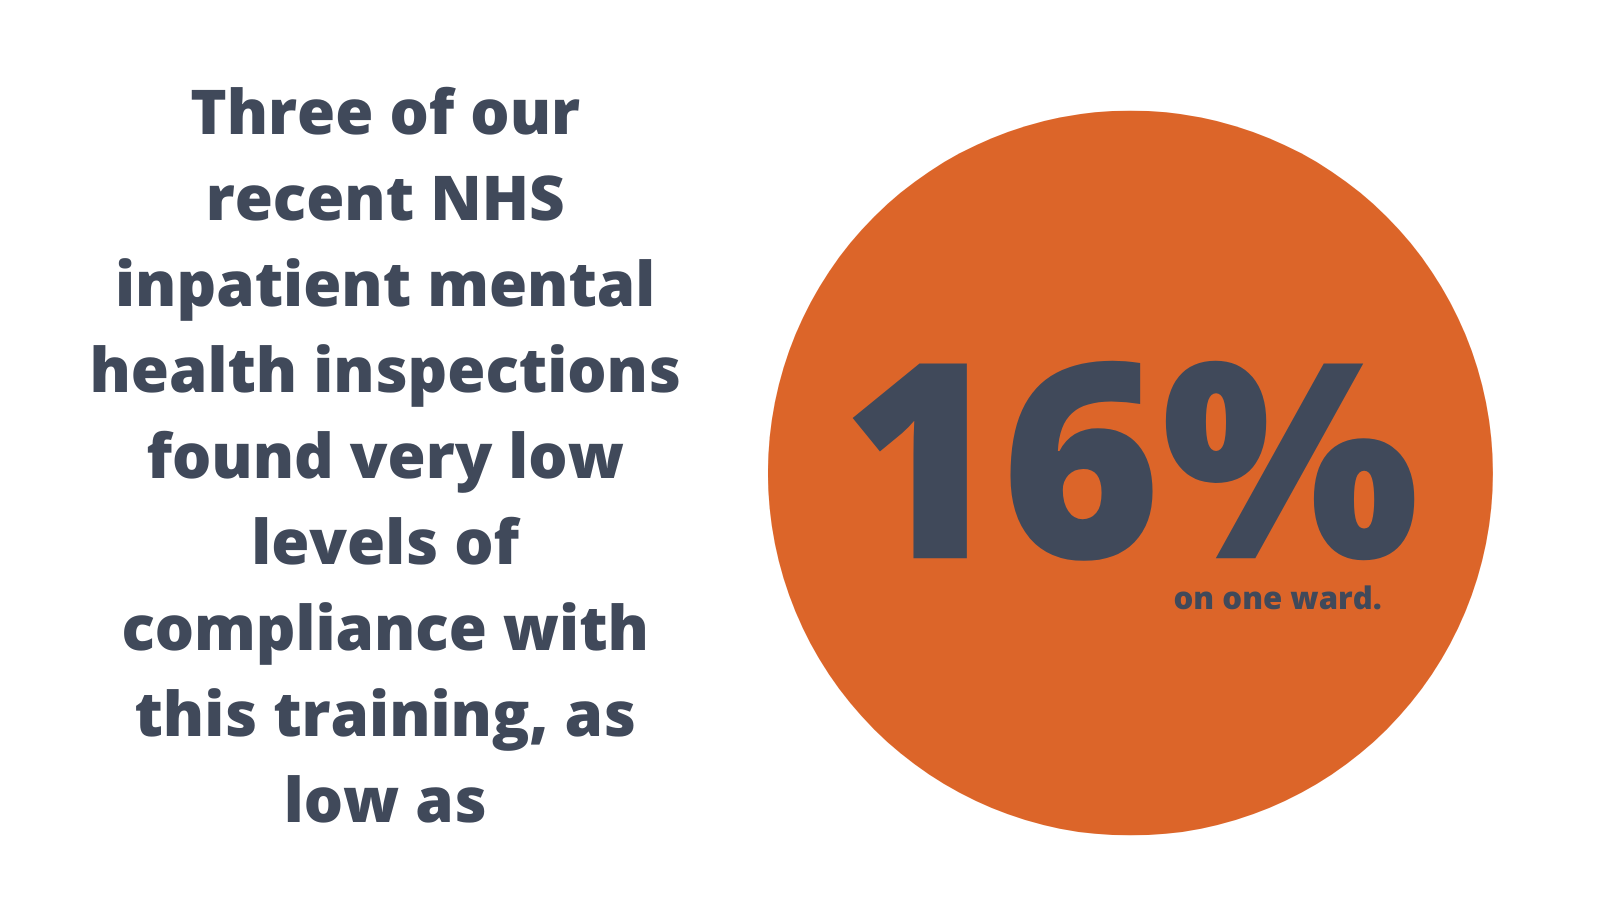 Three of our recent NHS inpatient mental health inspections found very low levels of compliance with this training, as low as 16% in one ward